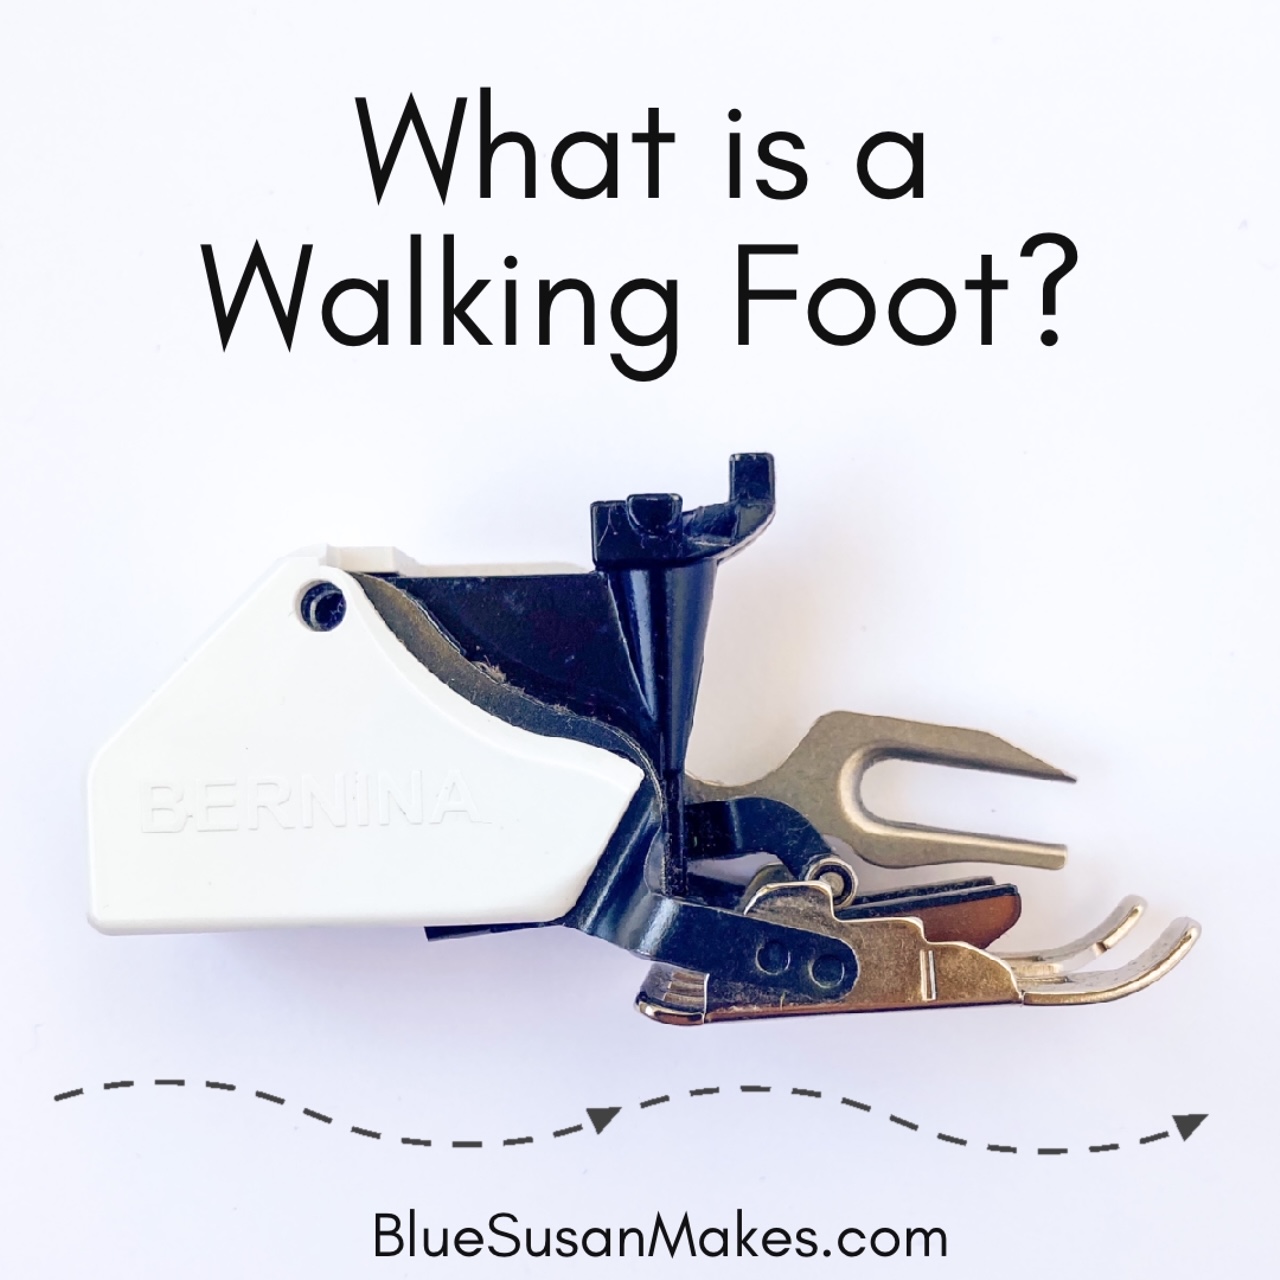 What is a Walking Foot Sewing Machine?